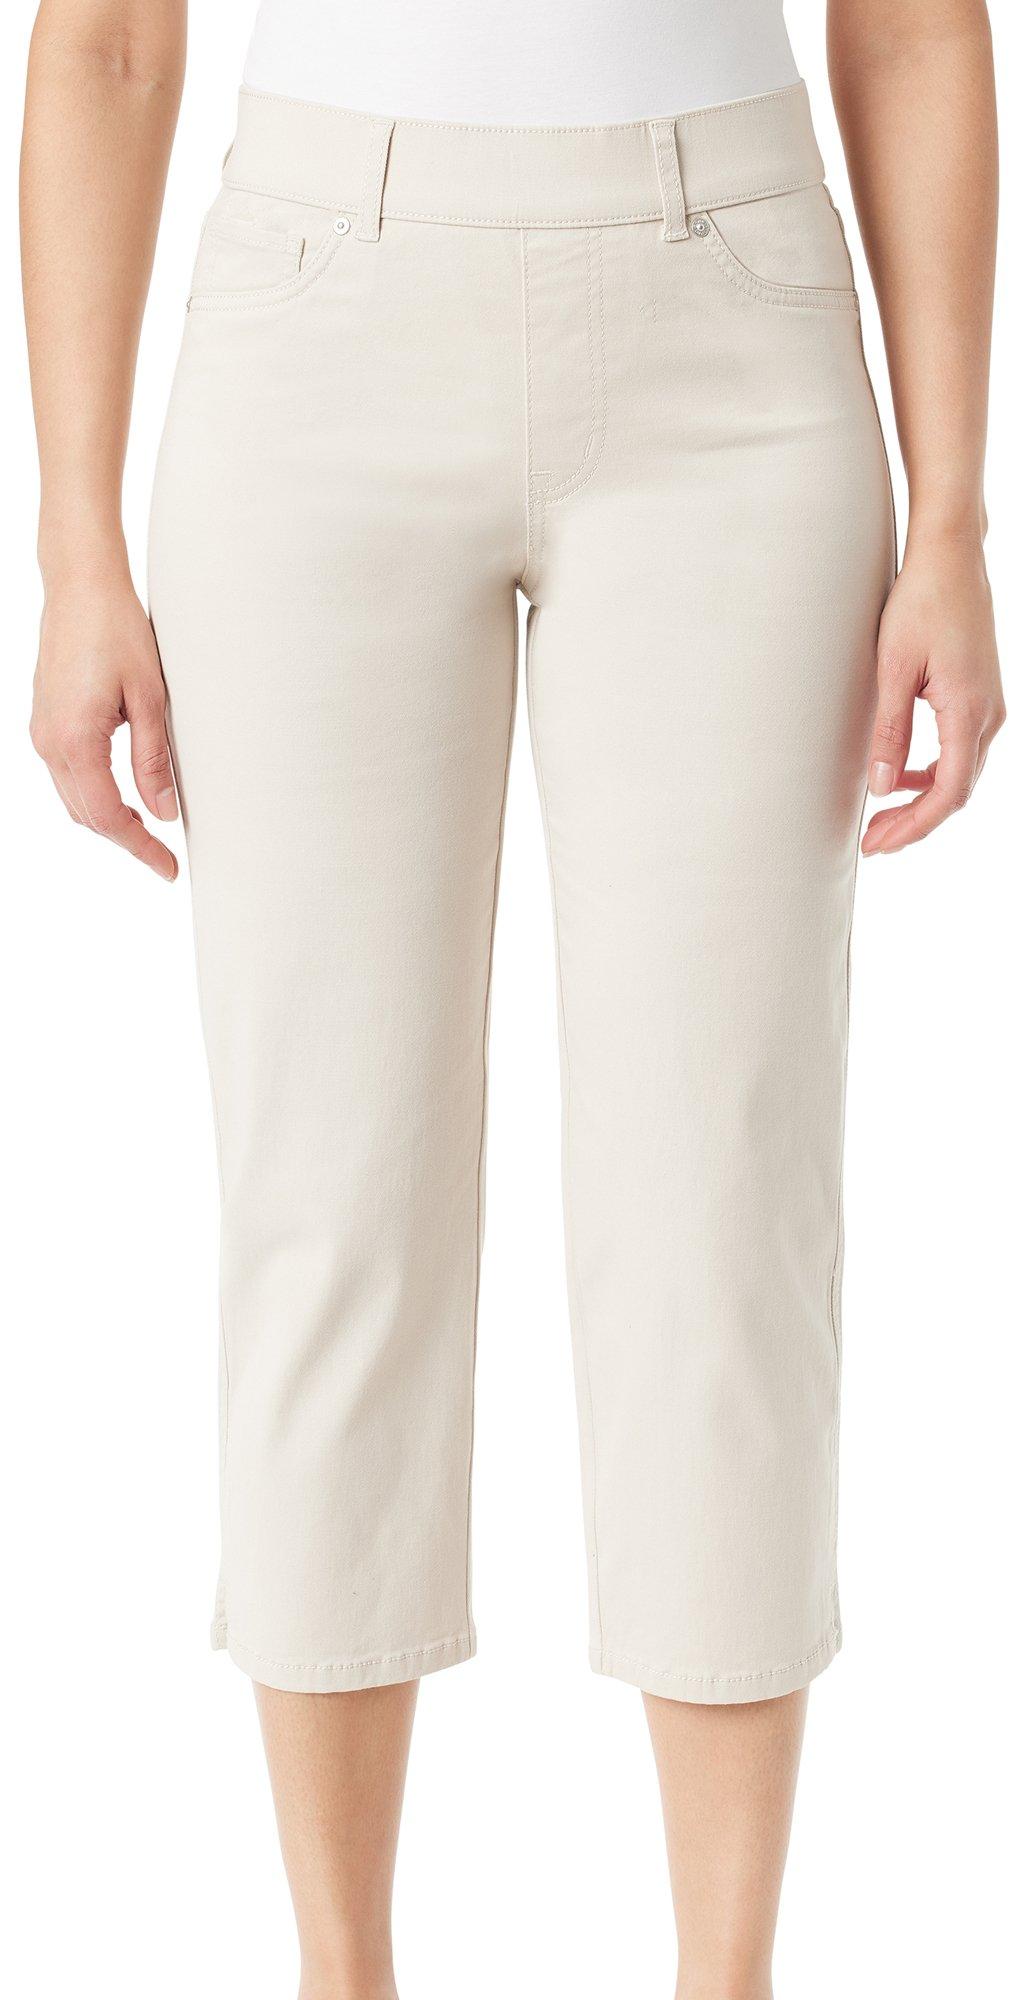 Womens 23 in. Solid SE Capris